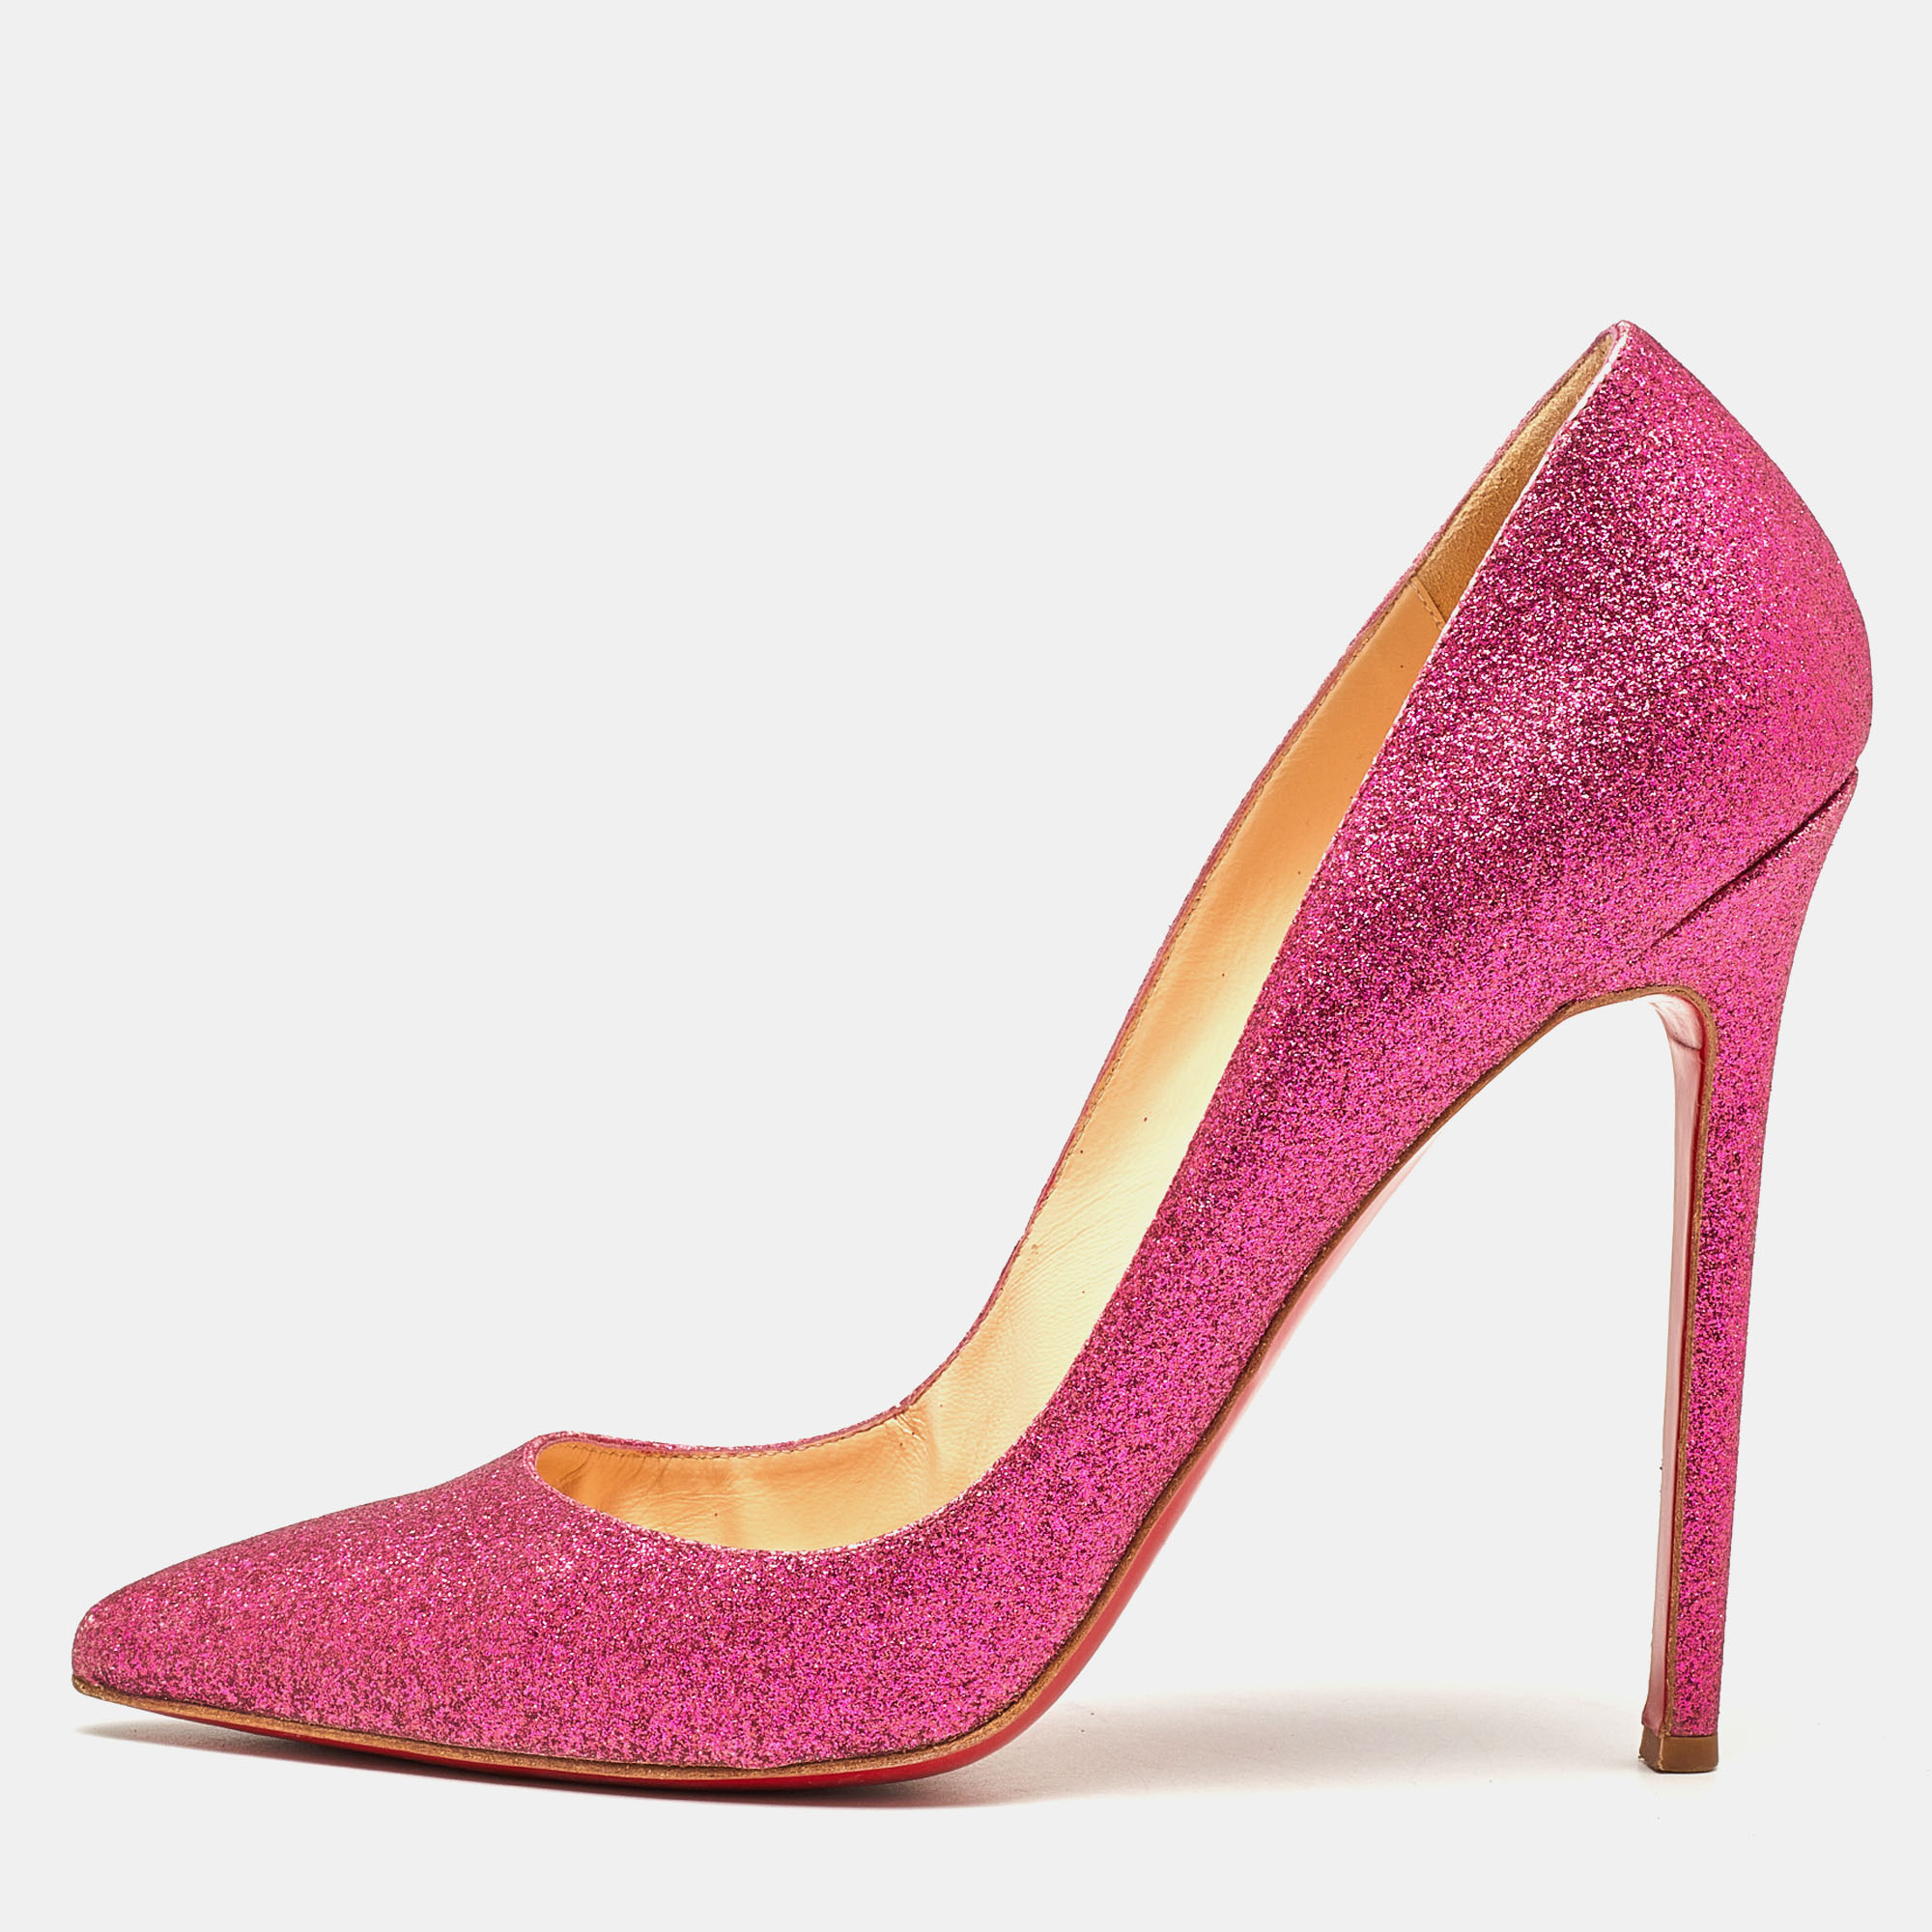 Pre-owned Christian Louboutin Pink Glitter Pigalle Pumps Size 39.5